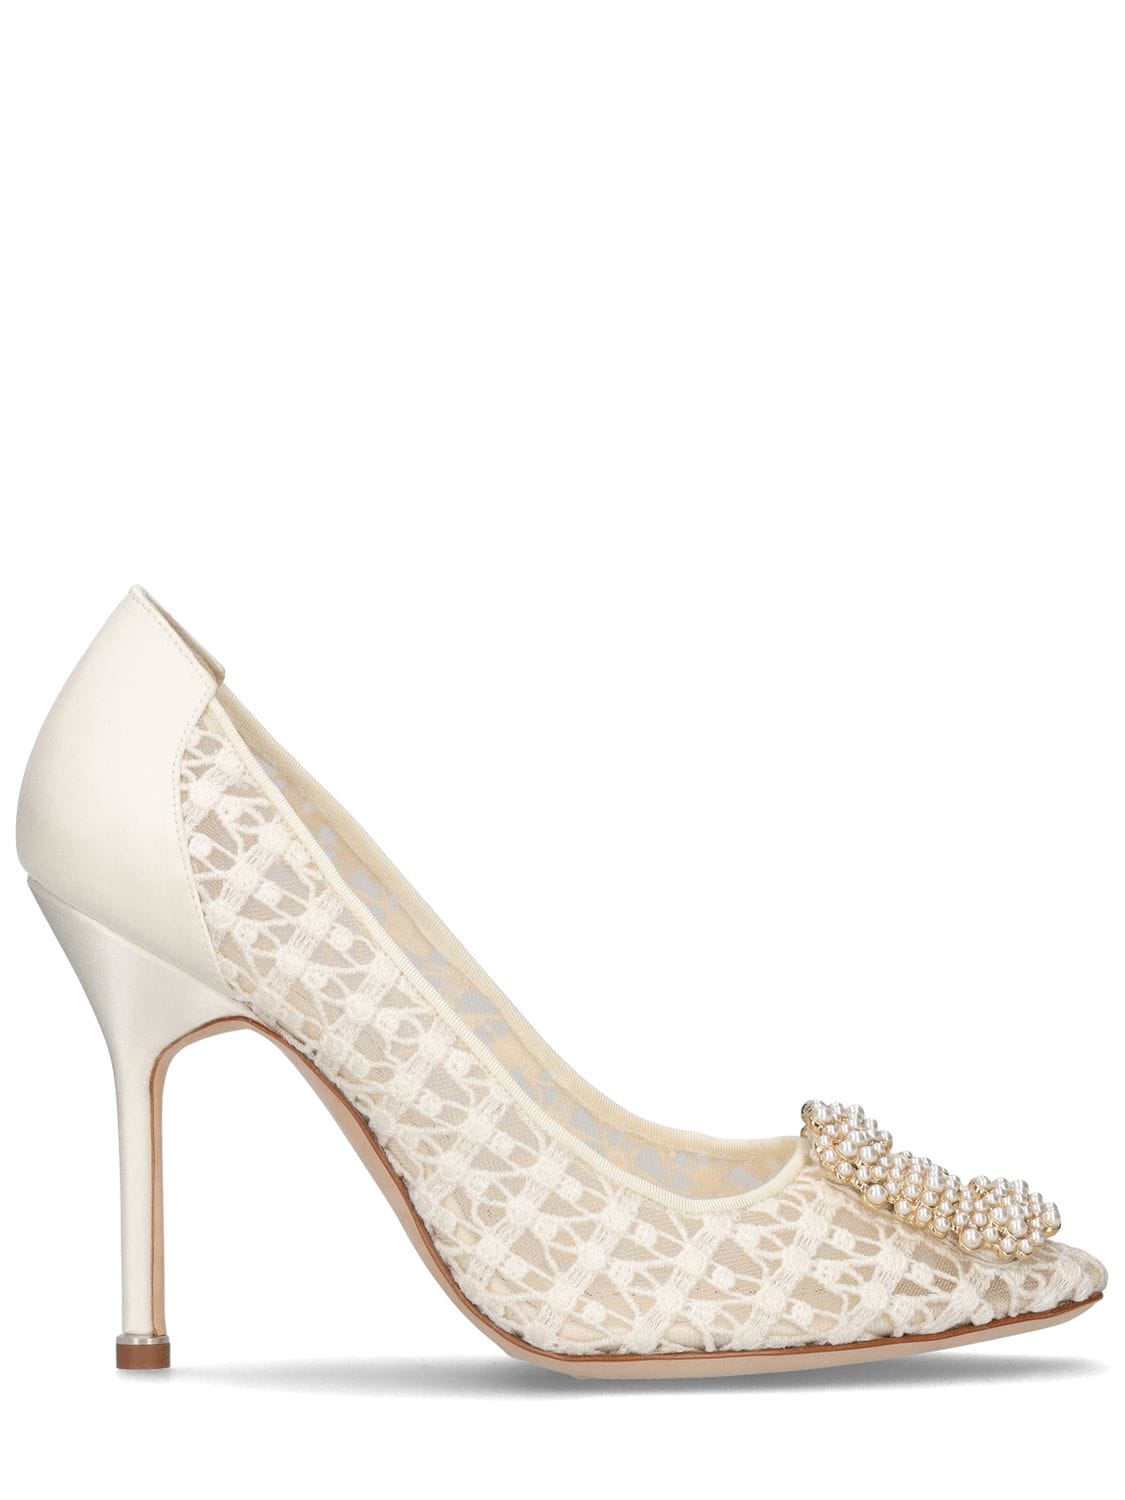 Manolo Blahnik 105mm Hangisi Embellished Lace Pumps In Ivory | ModeSens